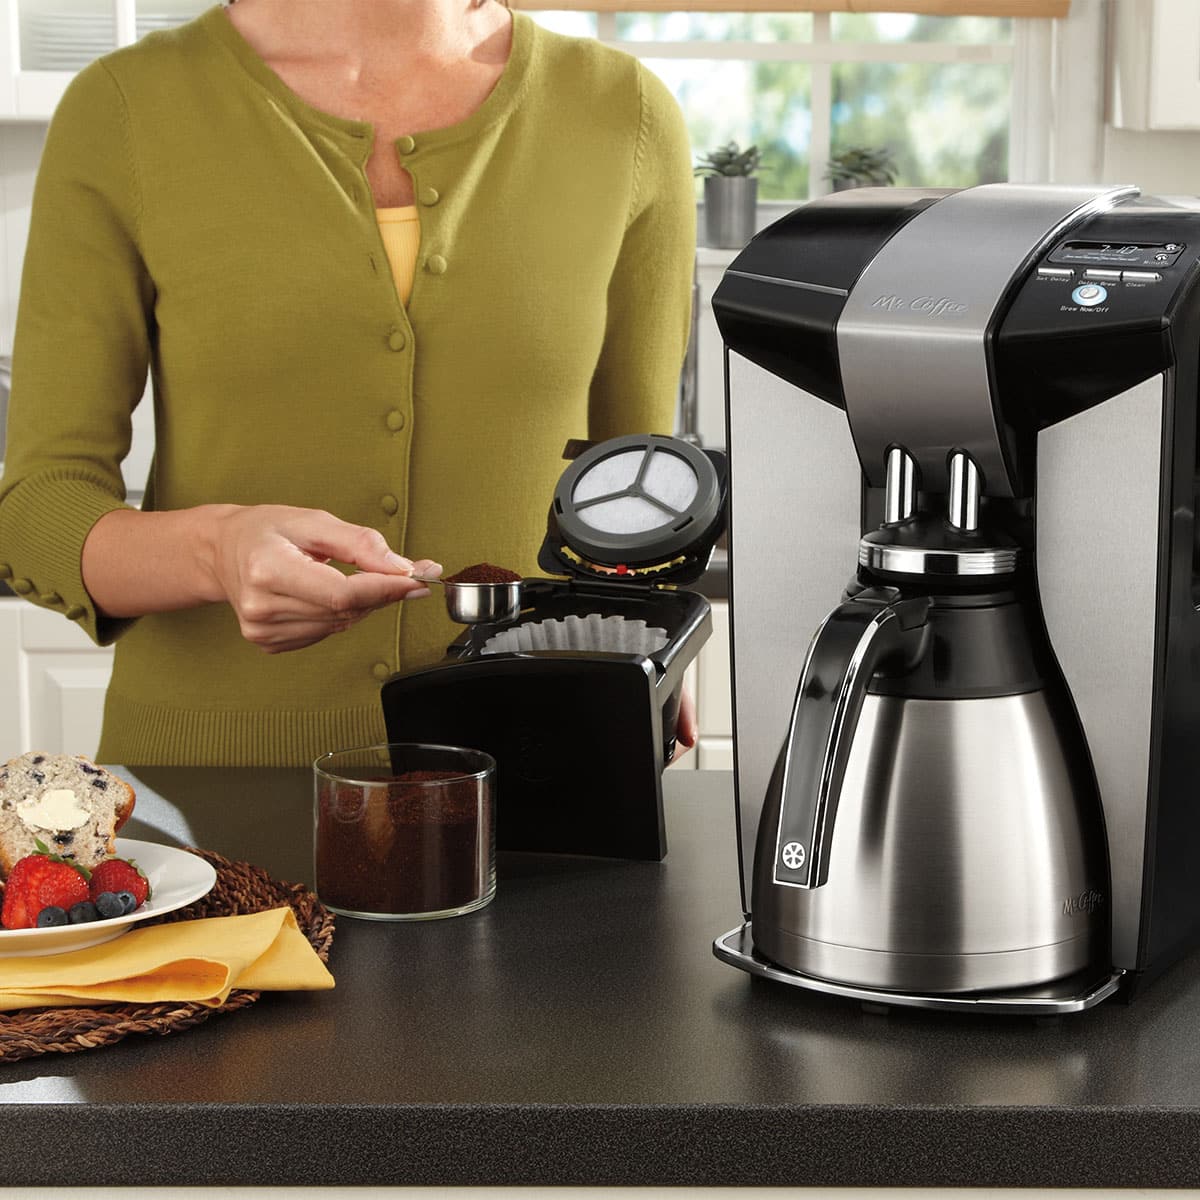 The best Method to Clean Your Coffee Maker The Simplest Way « Bunn ...